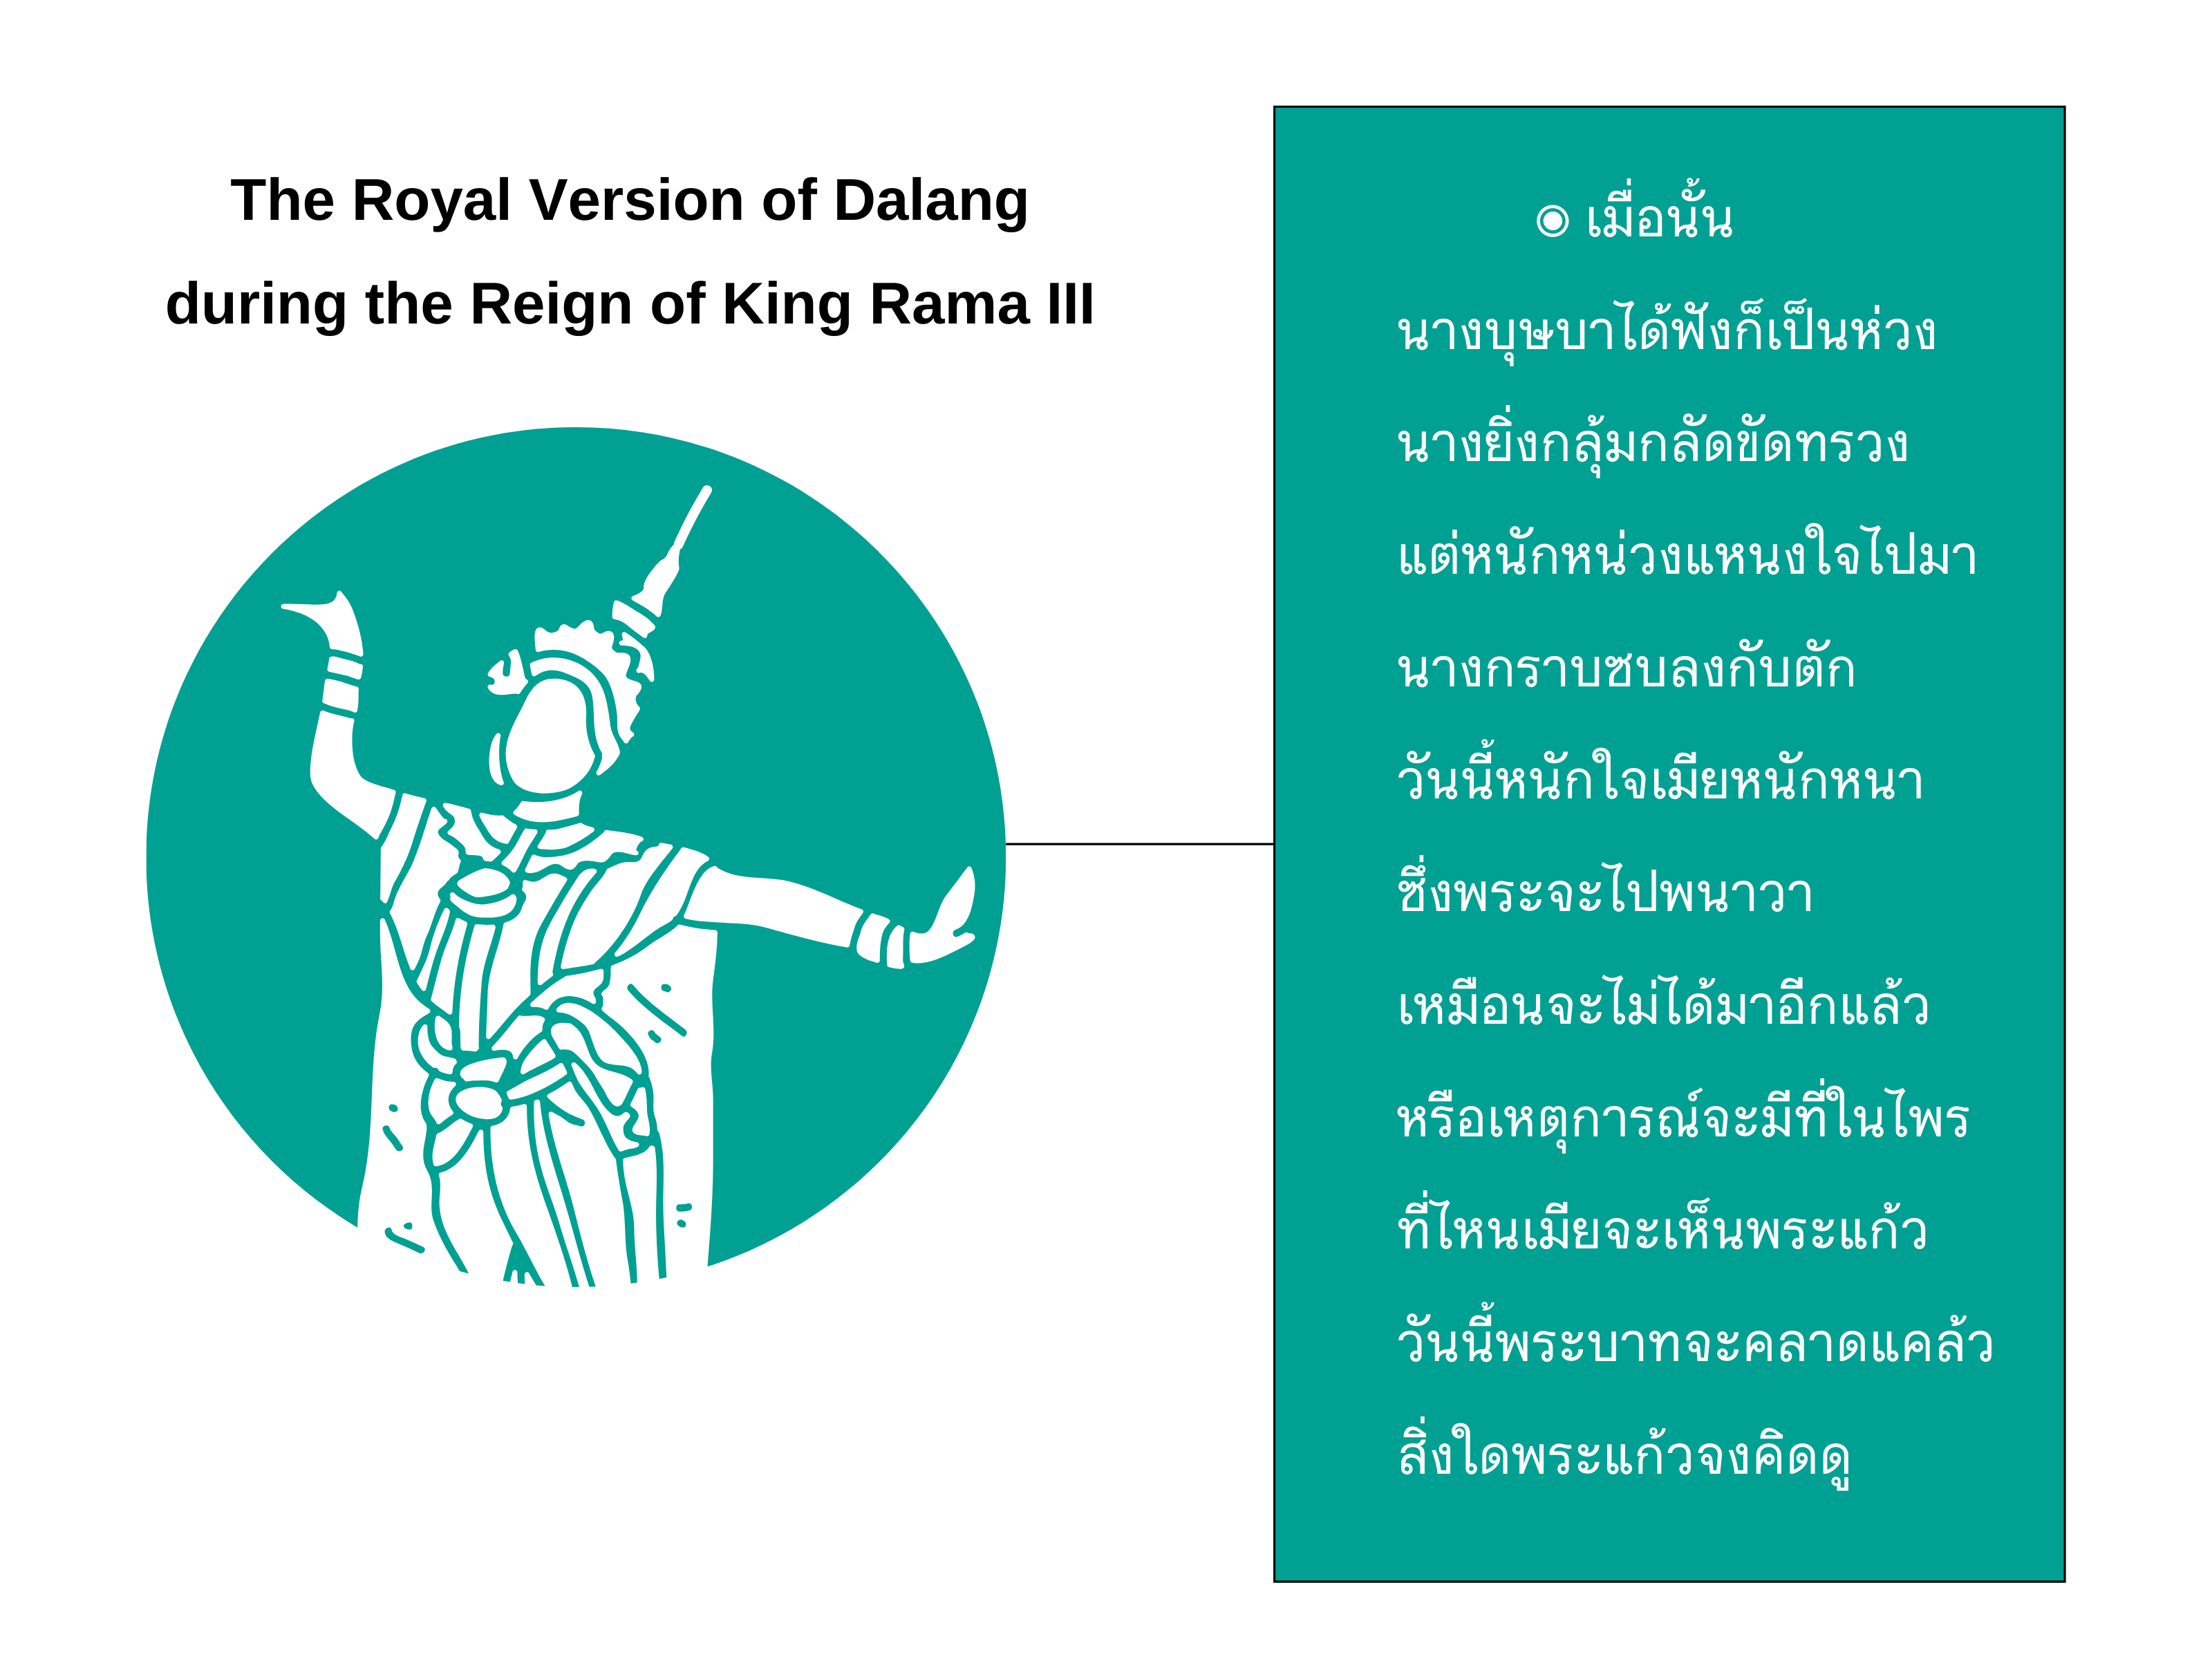 The Royal Version of Dalang during the Reign of King Rama III:  The Art of Playwriting for a Court Dance-Drama